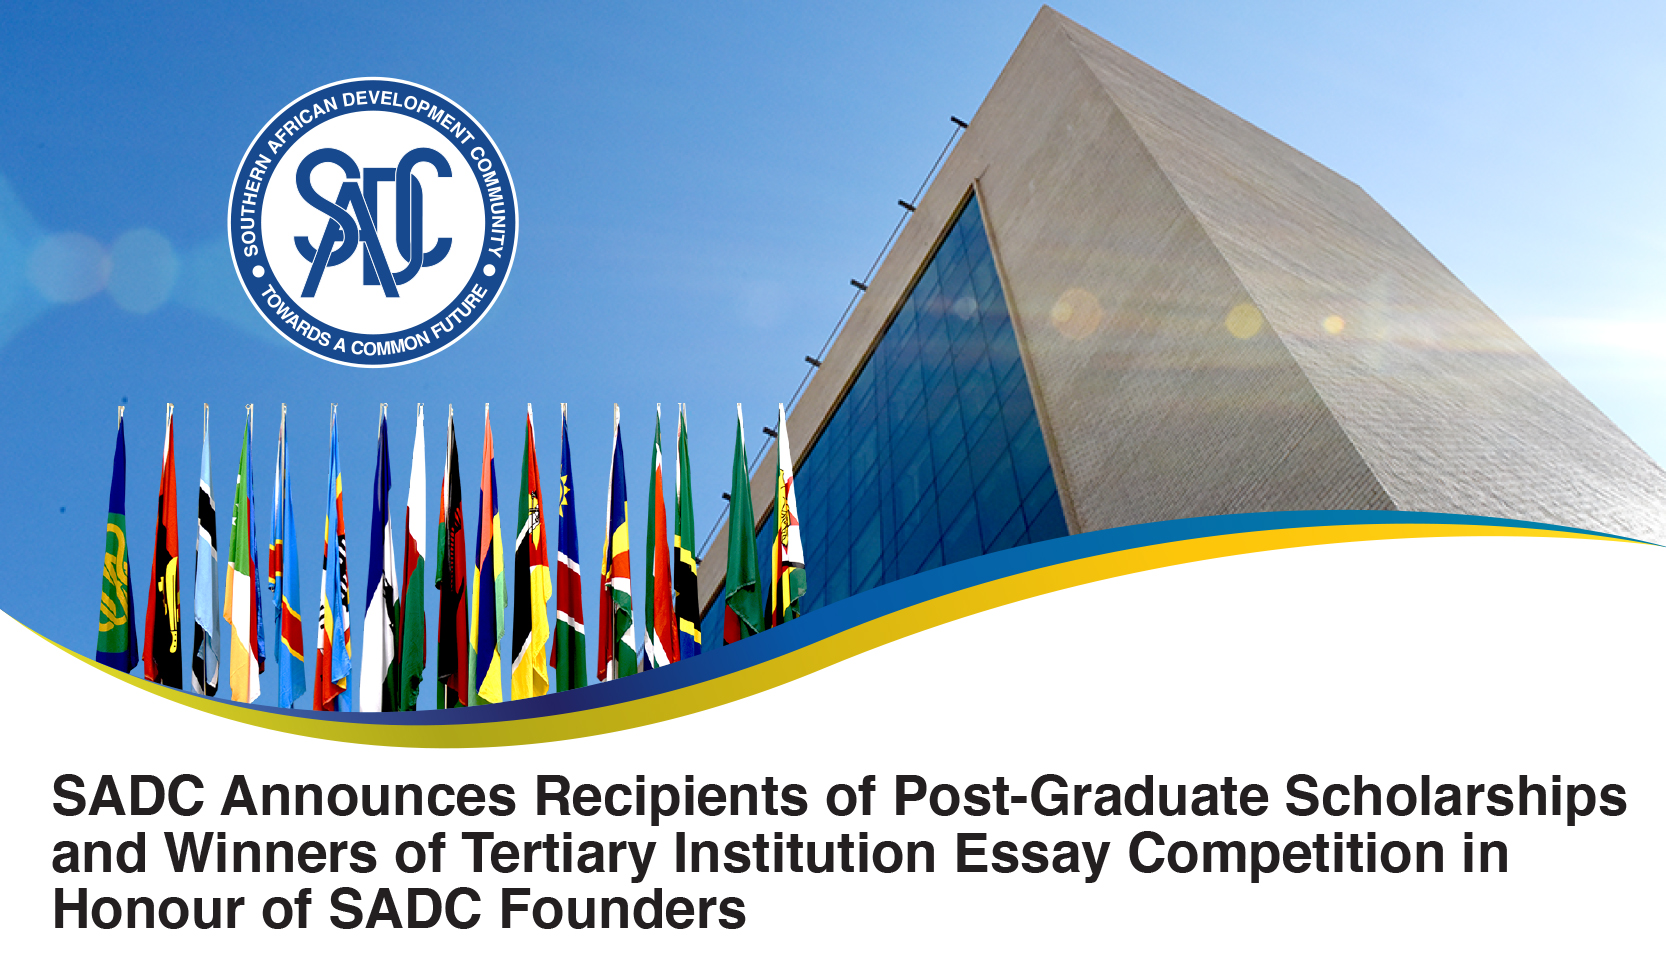 sadc essay competition 2021 winners